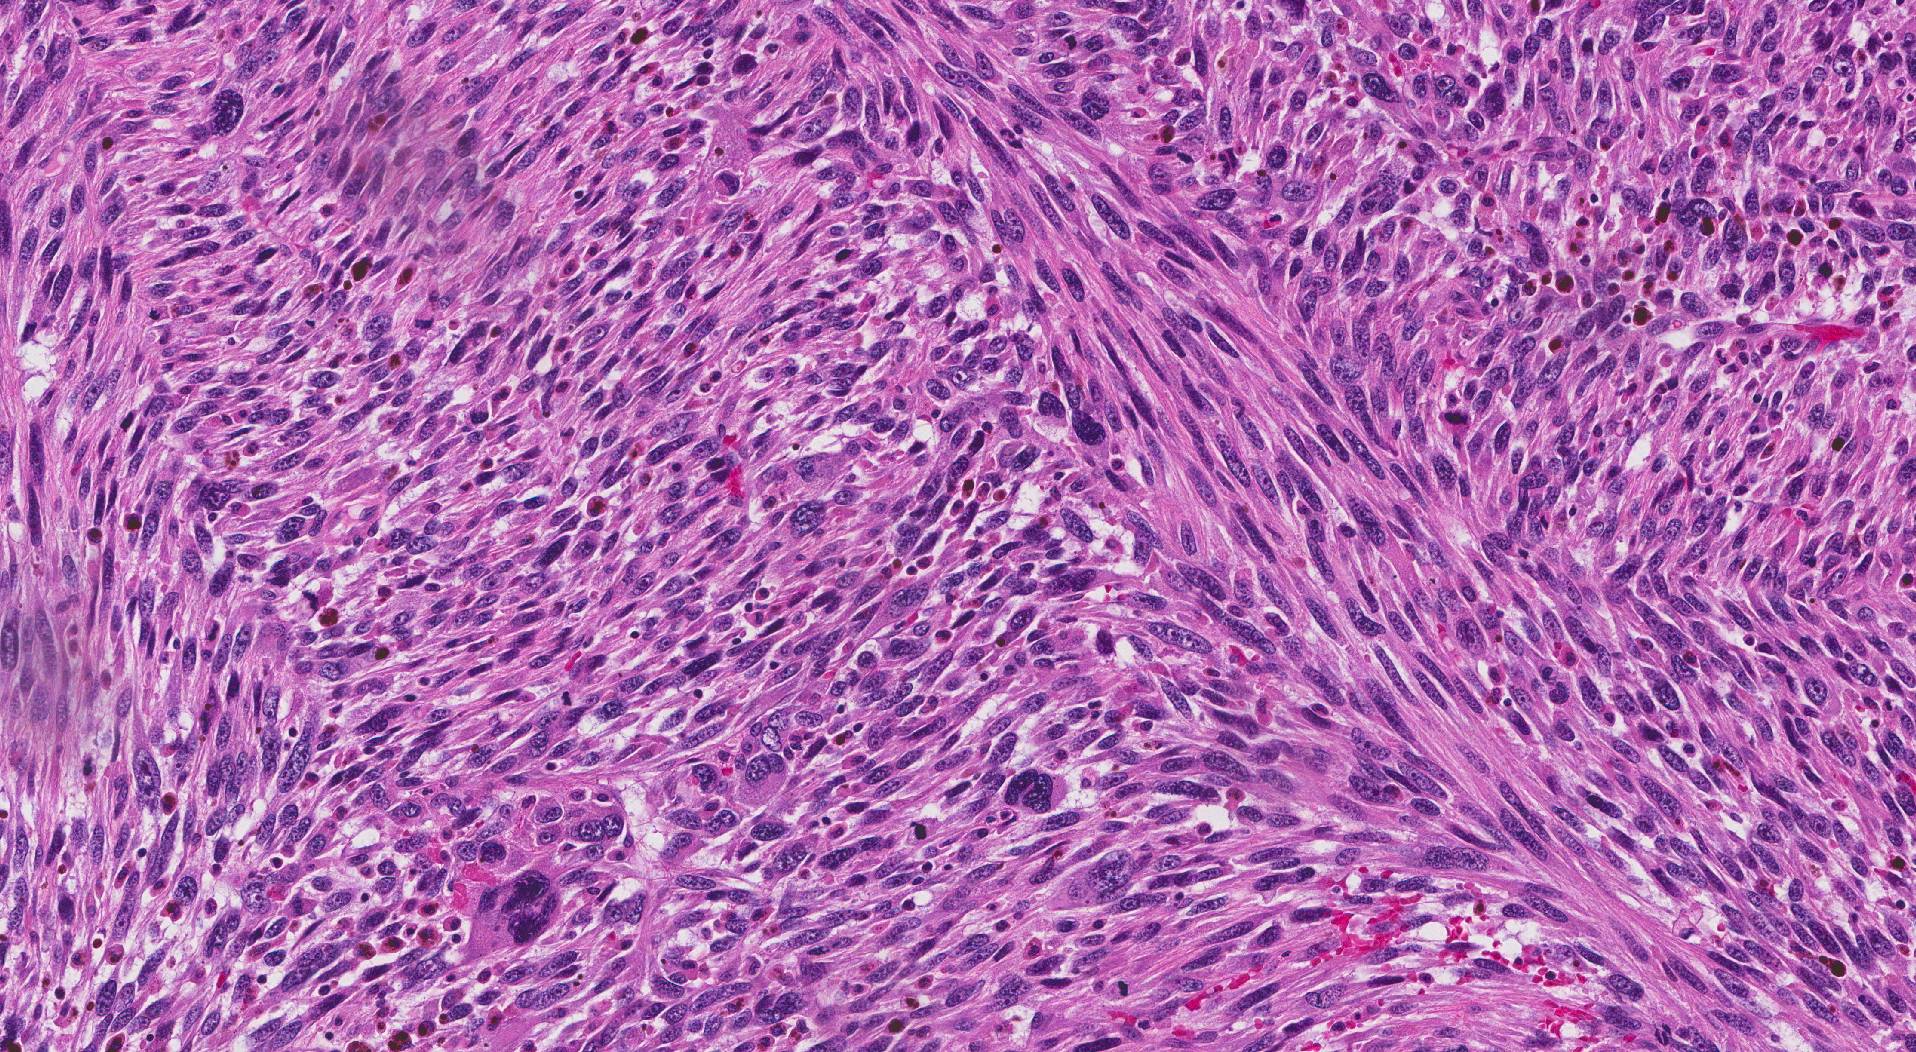 Leiomyosarcoma of the uterus. This picture shows a tumour made up of abnormal looking spindle cells arranged in fascicles.